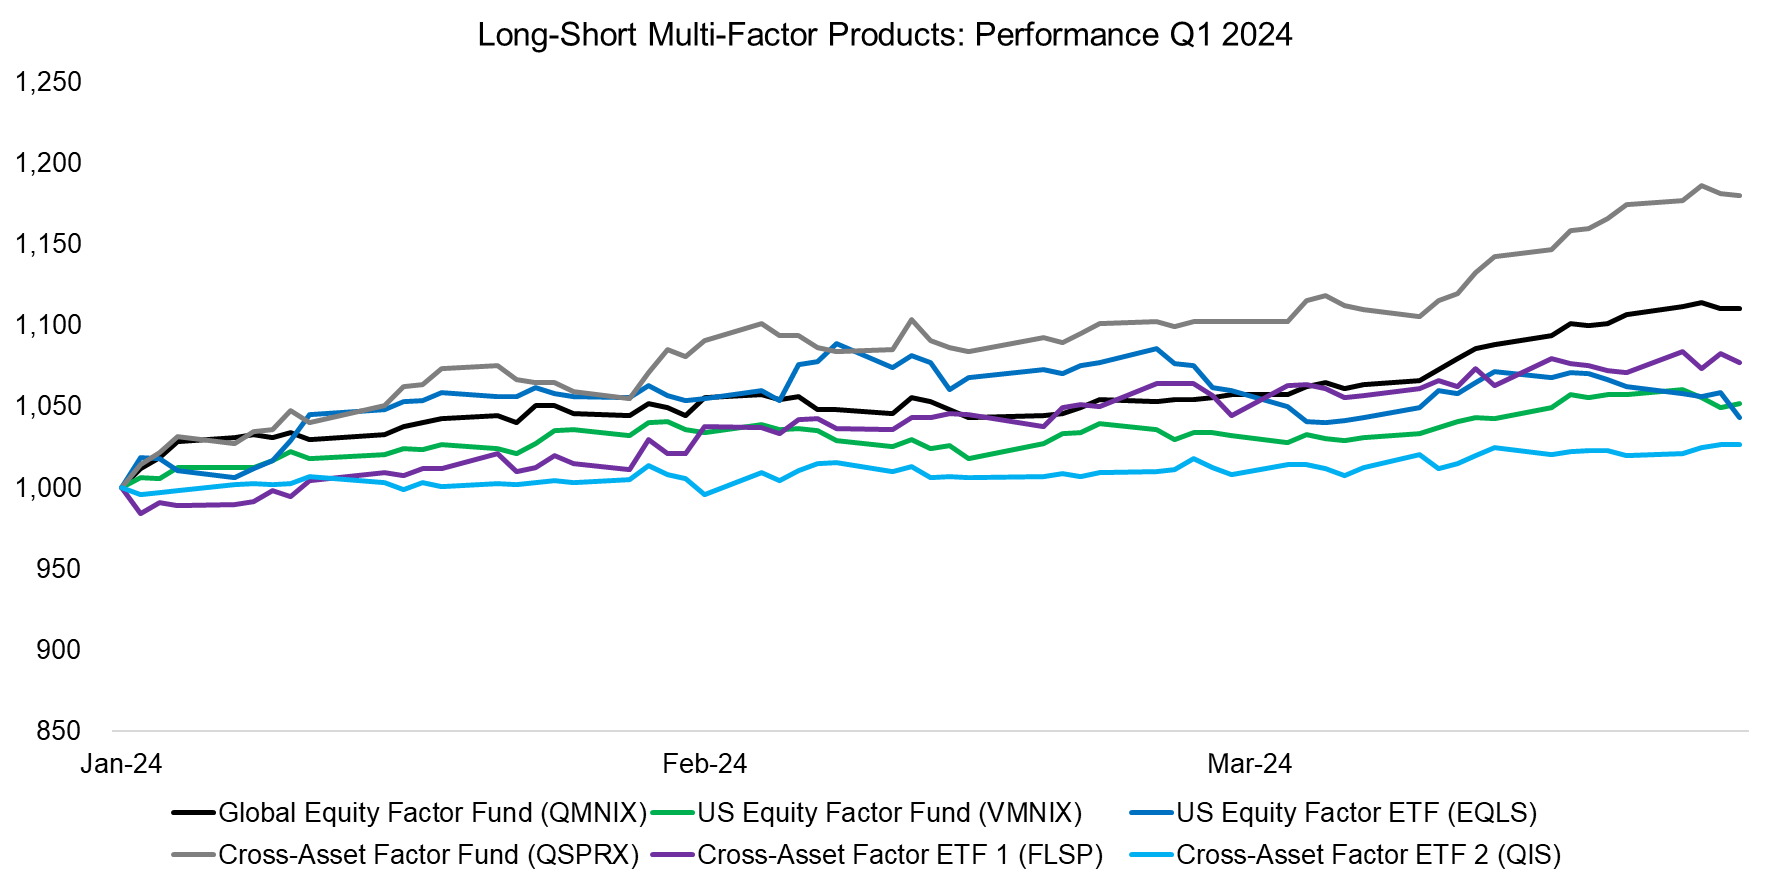 Long-Short Multi-Factor Products Performance Q1 2024